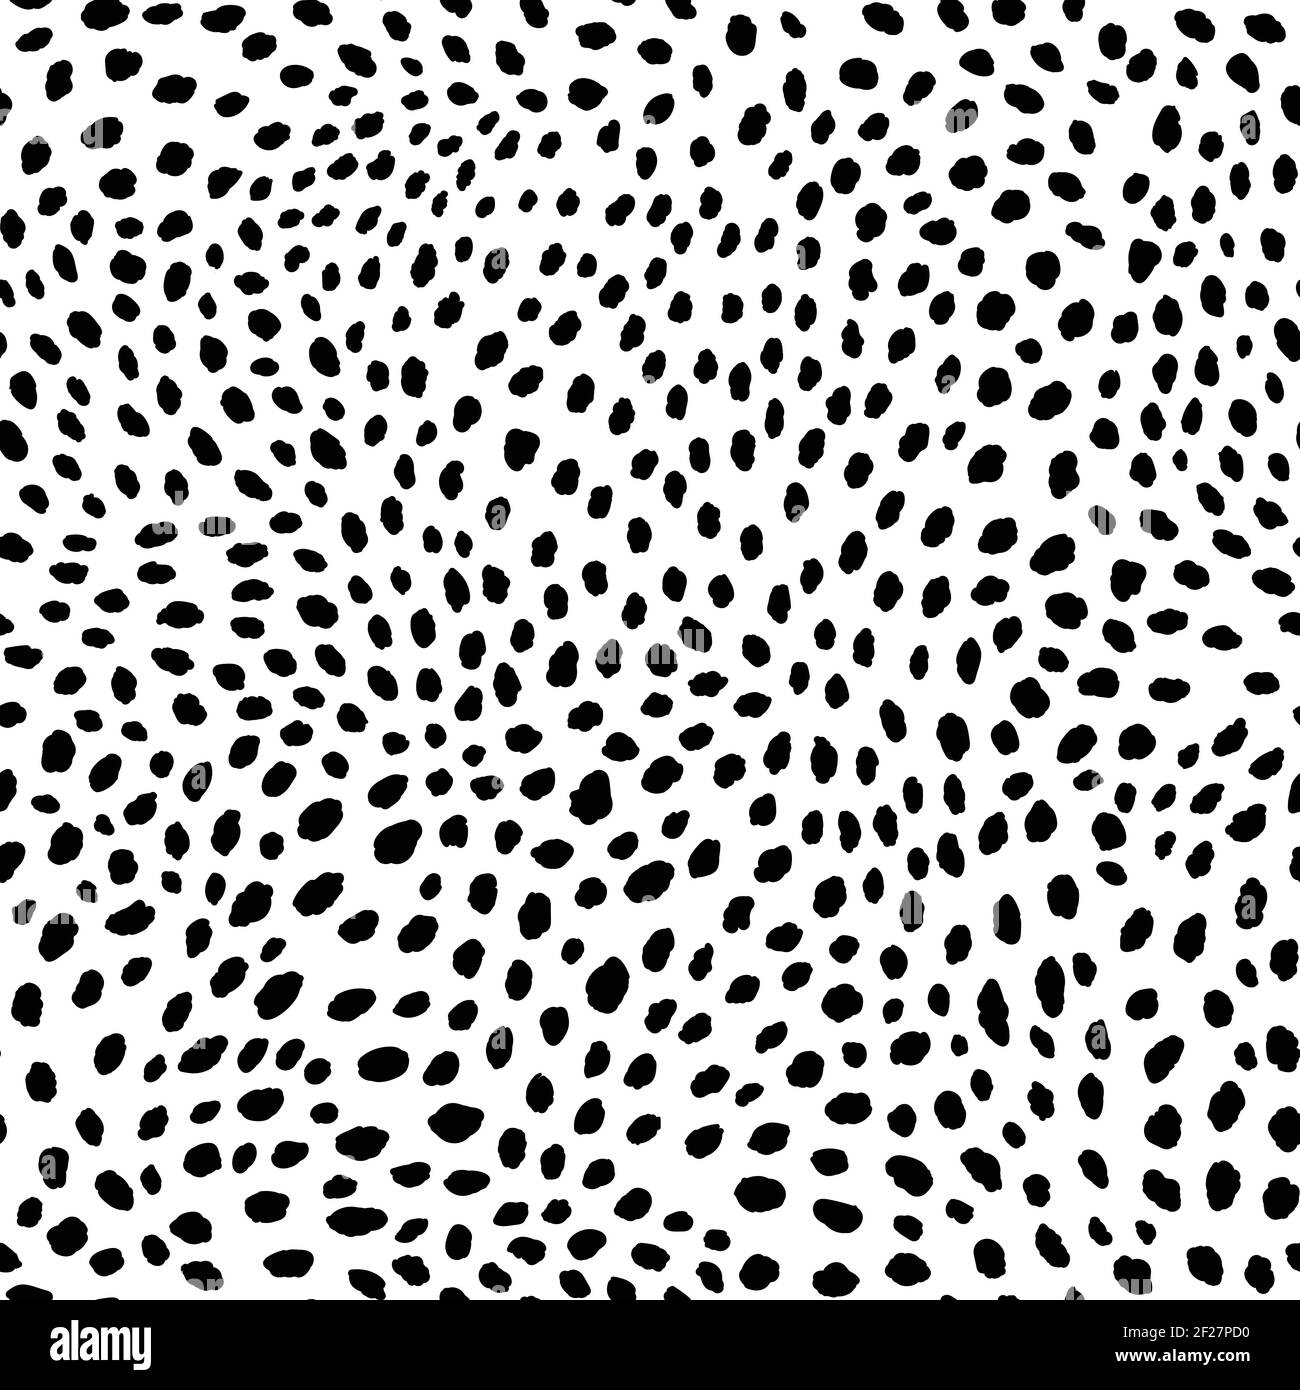 Abstract modern leopard seamless pattern. Animals trendy background. Black and white decorative vector illustration for print, card, postcard, fabric Stock Vector